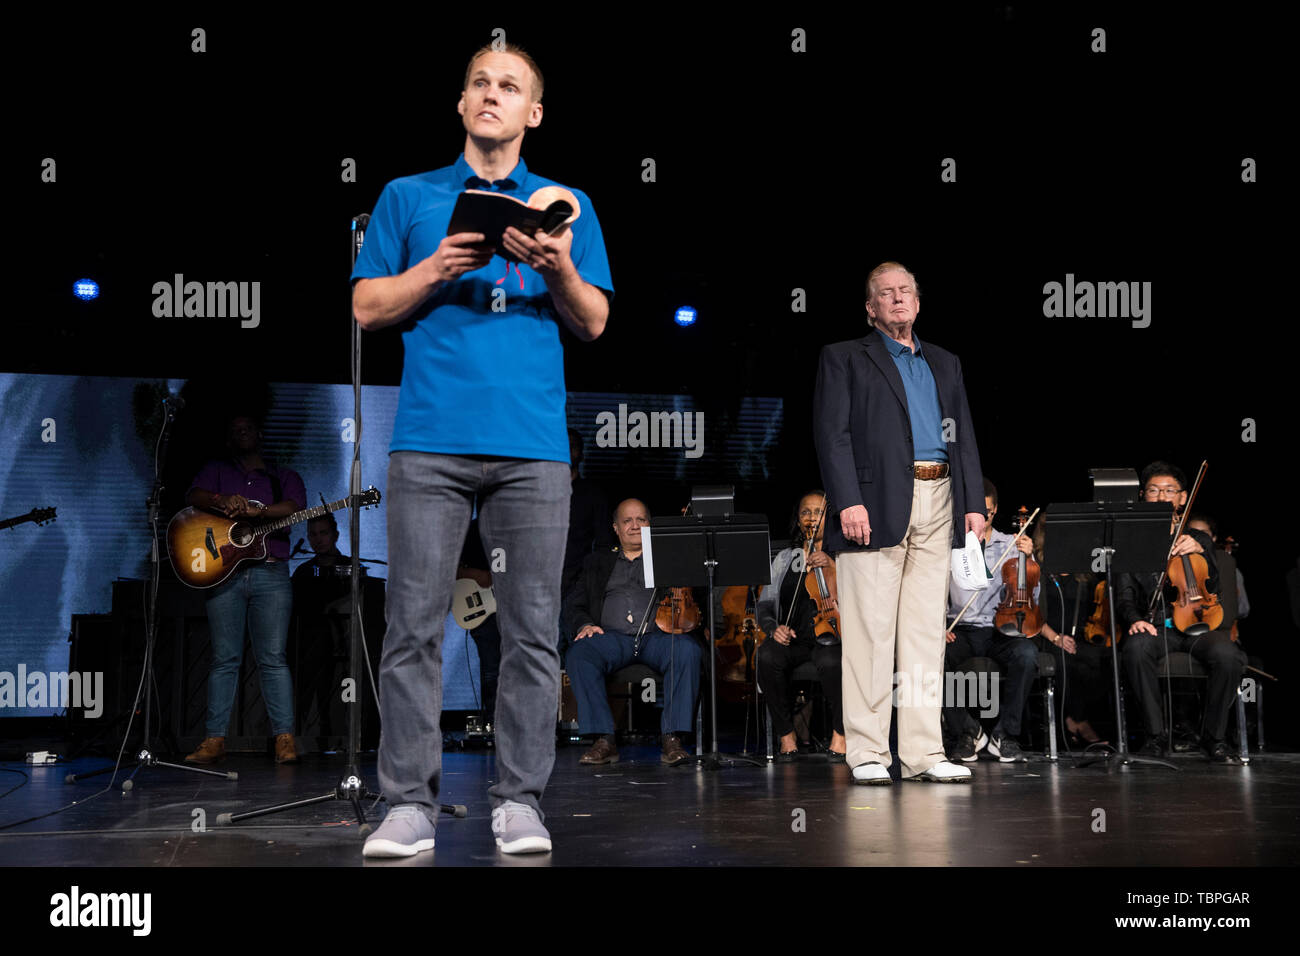 Vienna, United States Of America. 02nd June, 2019. United States President Donald J. Trump makes a surprise visit to McLean Bible Church in Vienna, Virginia, where the pastor David Platt prayed for him Sunday June 2, 2019. Credit: Sarah Silbiger/Pool via CNP | usage worldwide Credit: dpa/Alamy Live News Stock Photo